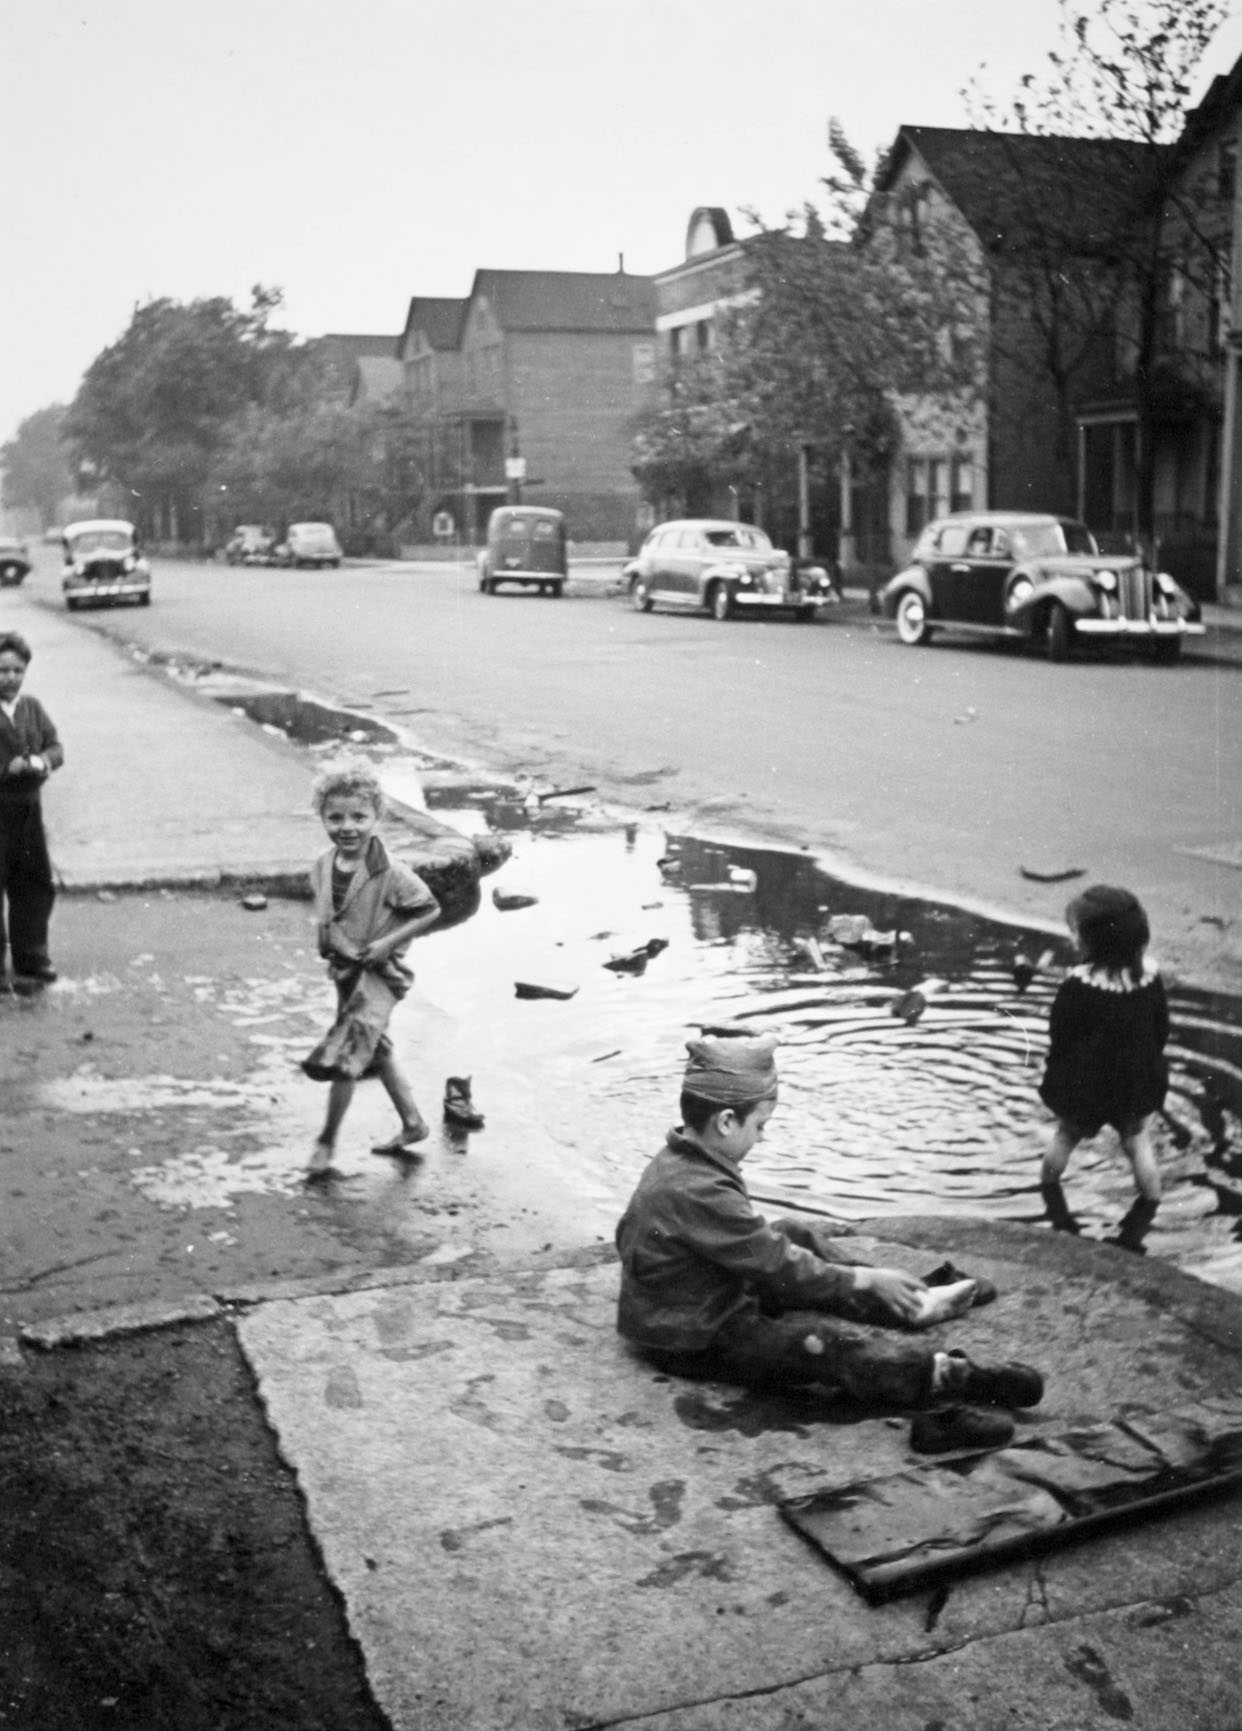 Children Playing in a Puddle